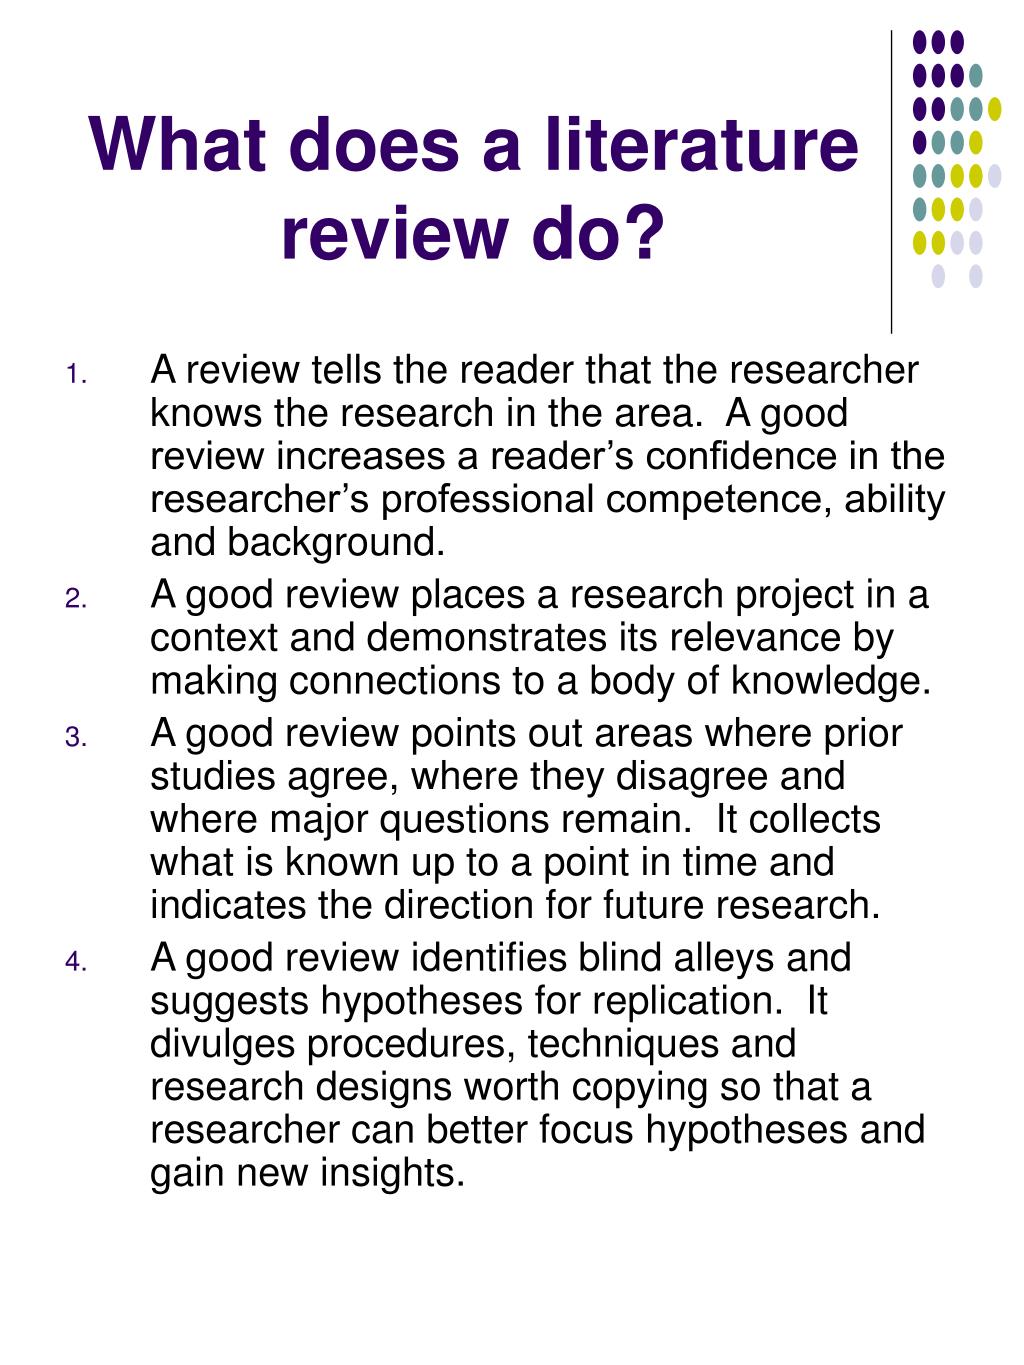 what does literature review in research mean